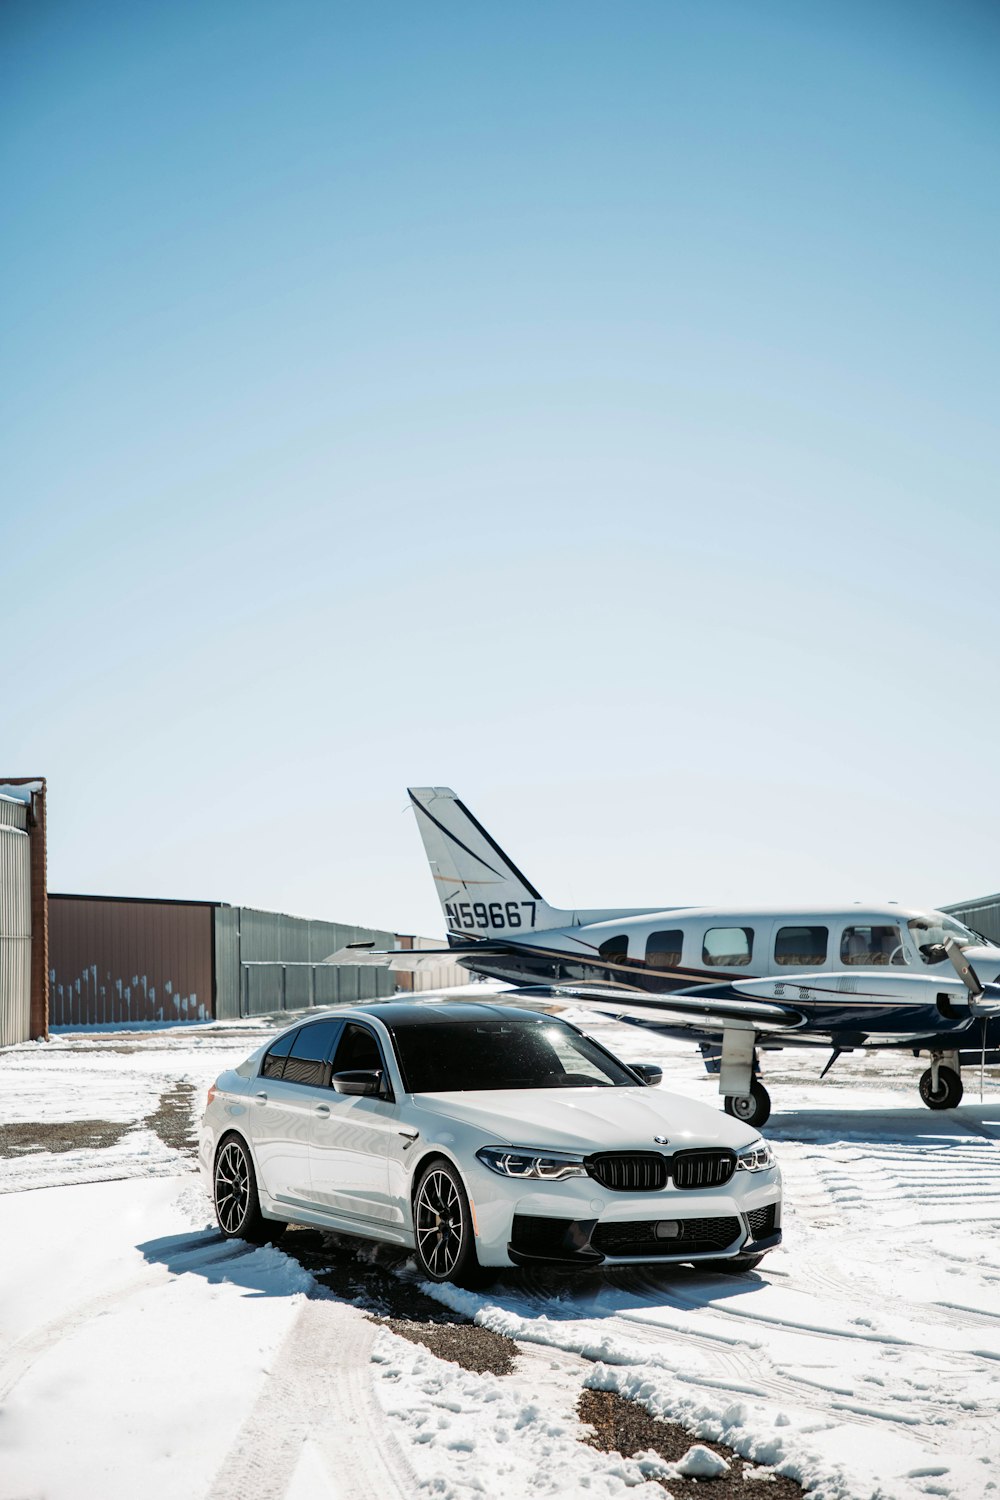 a white car parked next to an airplane on a snowy runway